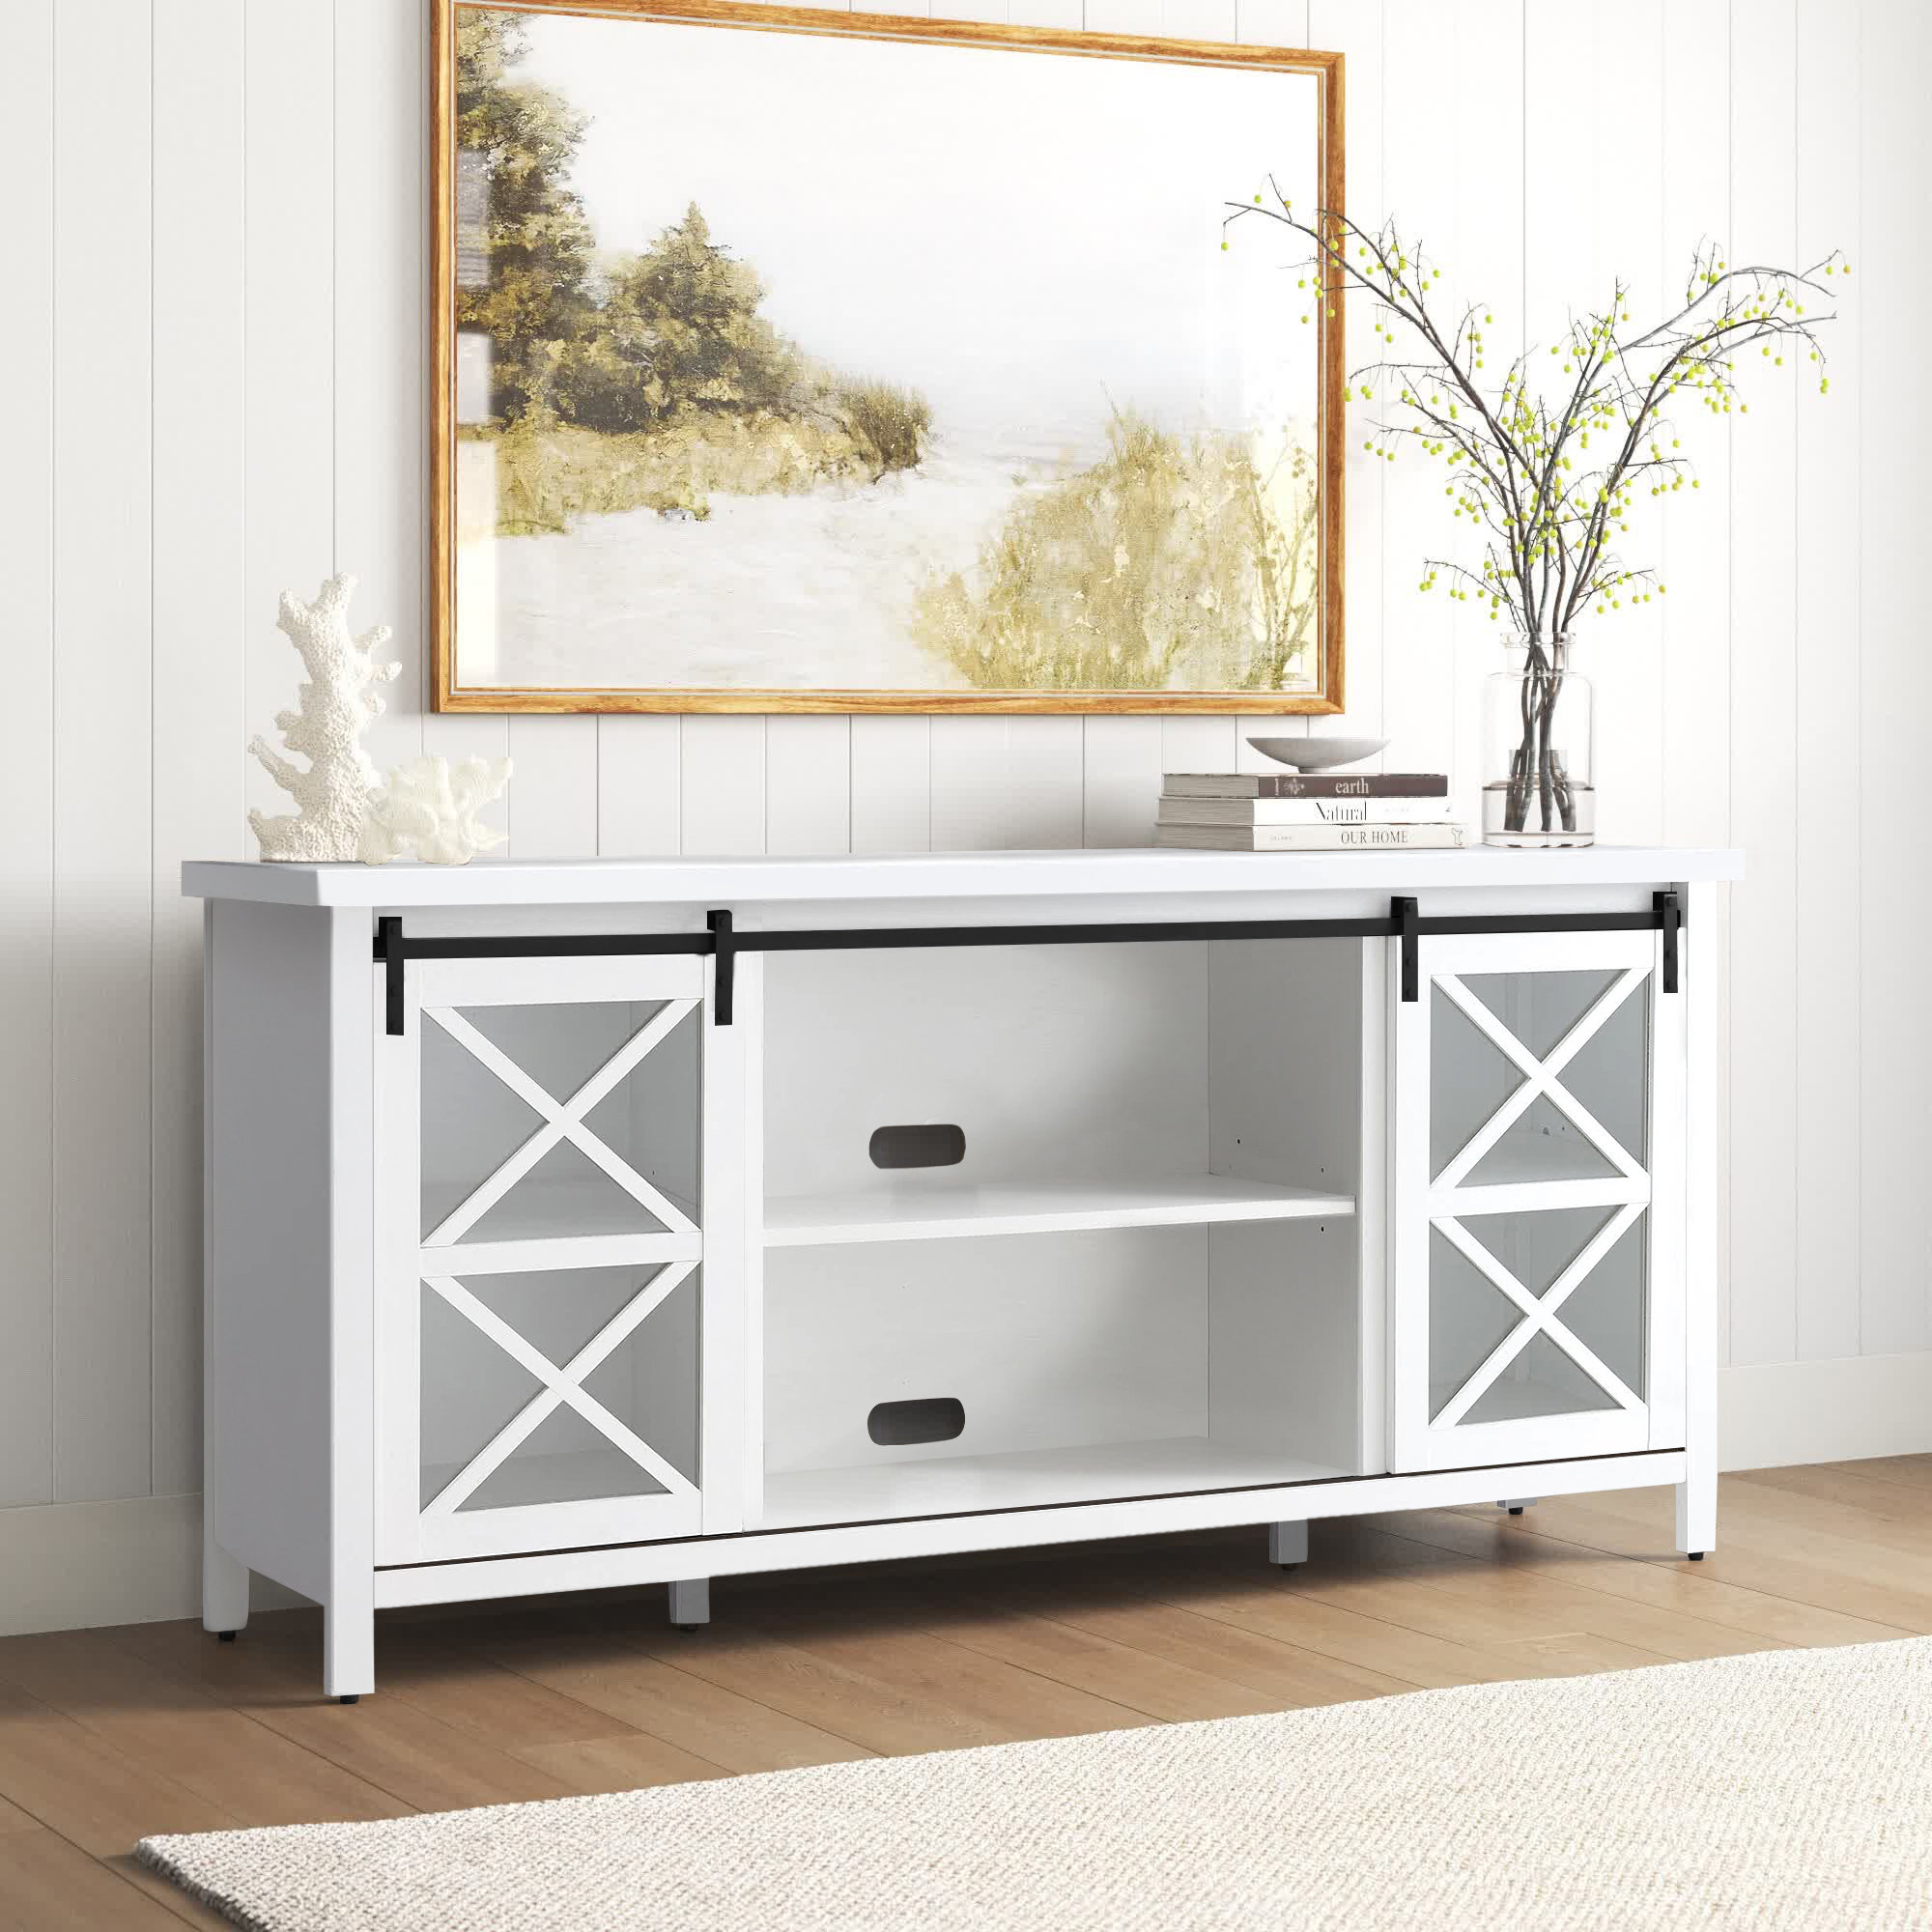 Gracie Oaks Laquela Farmhouse TV Stand For Tvs Up To 75, Wood TV Media  Console Table Cabinet Storage & Reviews